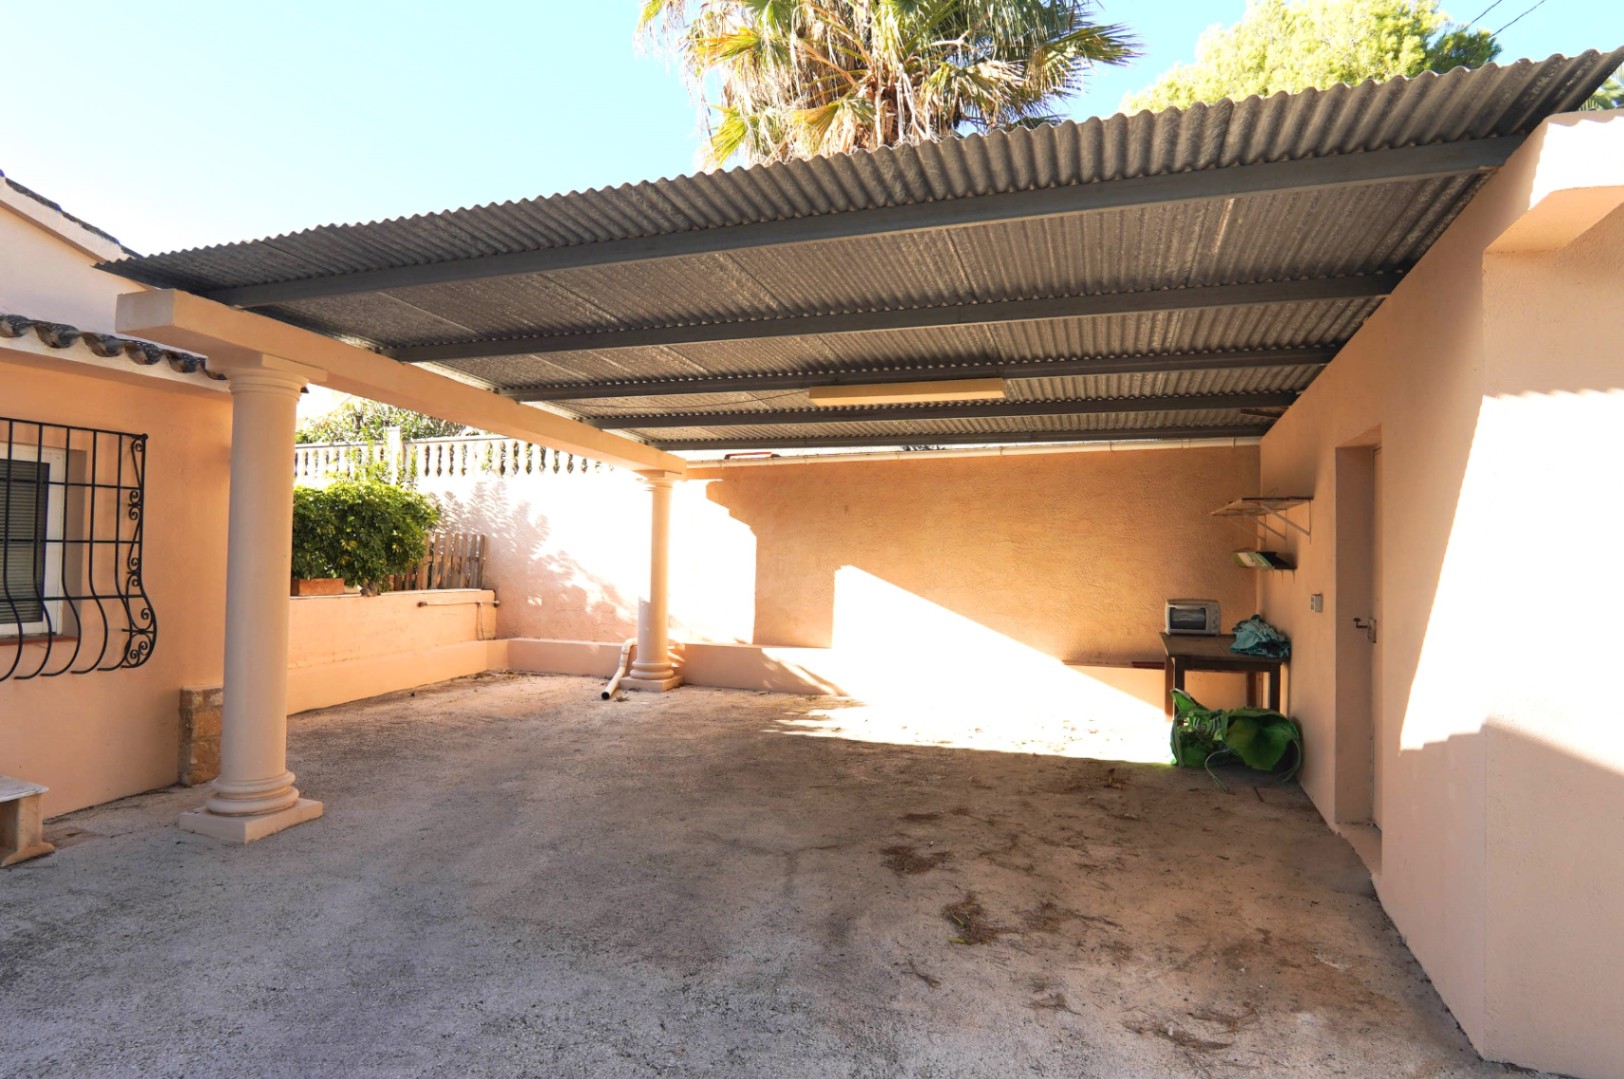 THE BEST LOCATION, MEDITERRANEAN HOUSE 600 METERS FROM THE SEA IN BENISSA